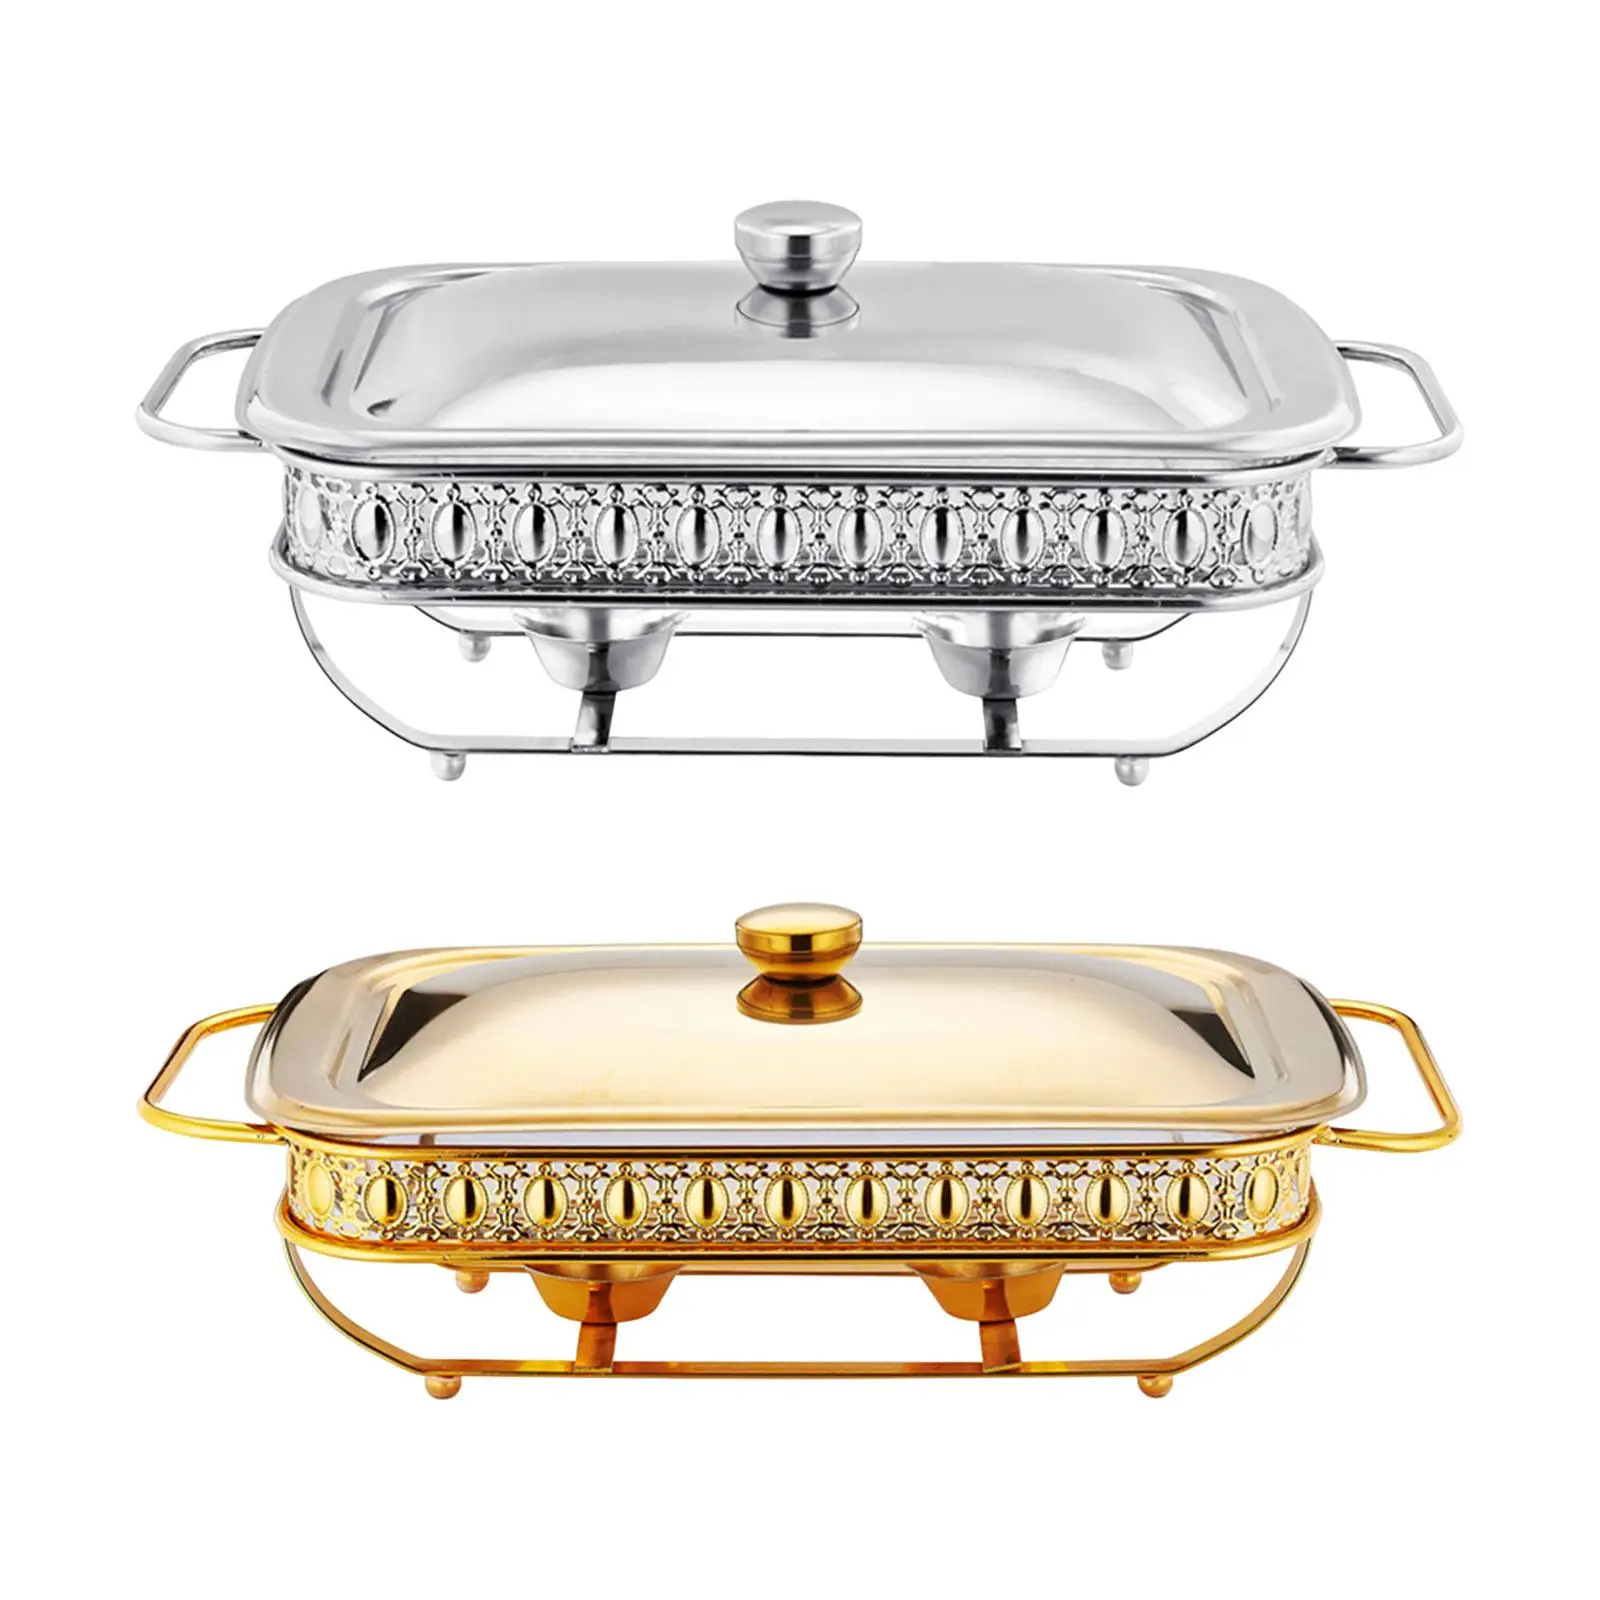 Stainless Steel Chafing Dish Buffet Set,Rectangular Catering Warmer Set with Trays for Banquet